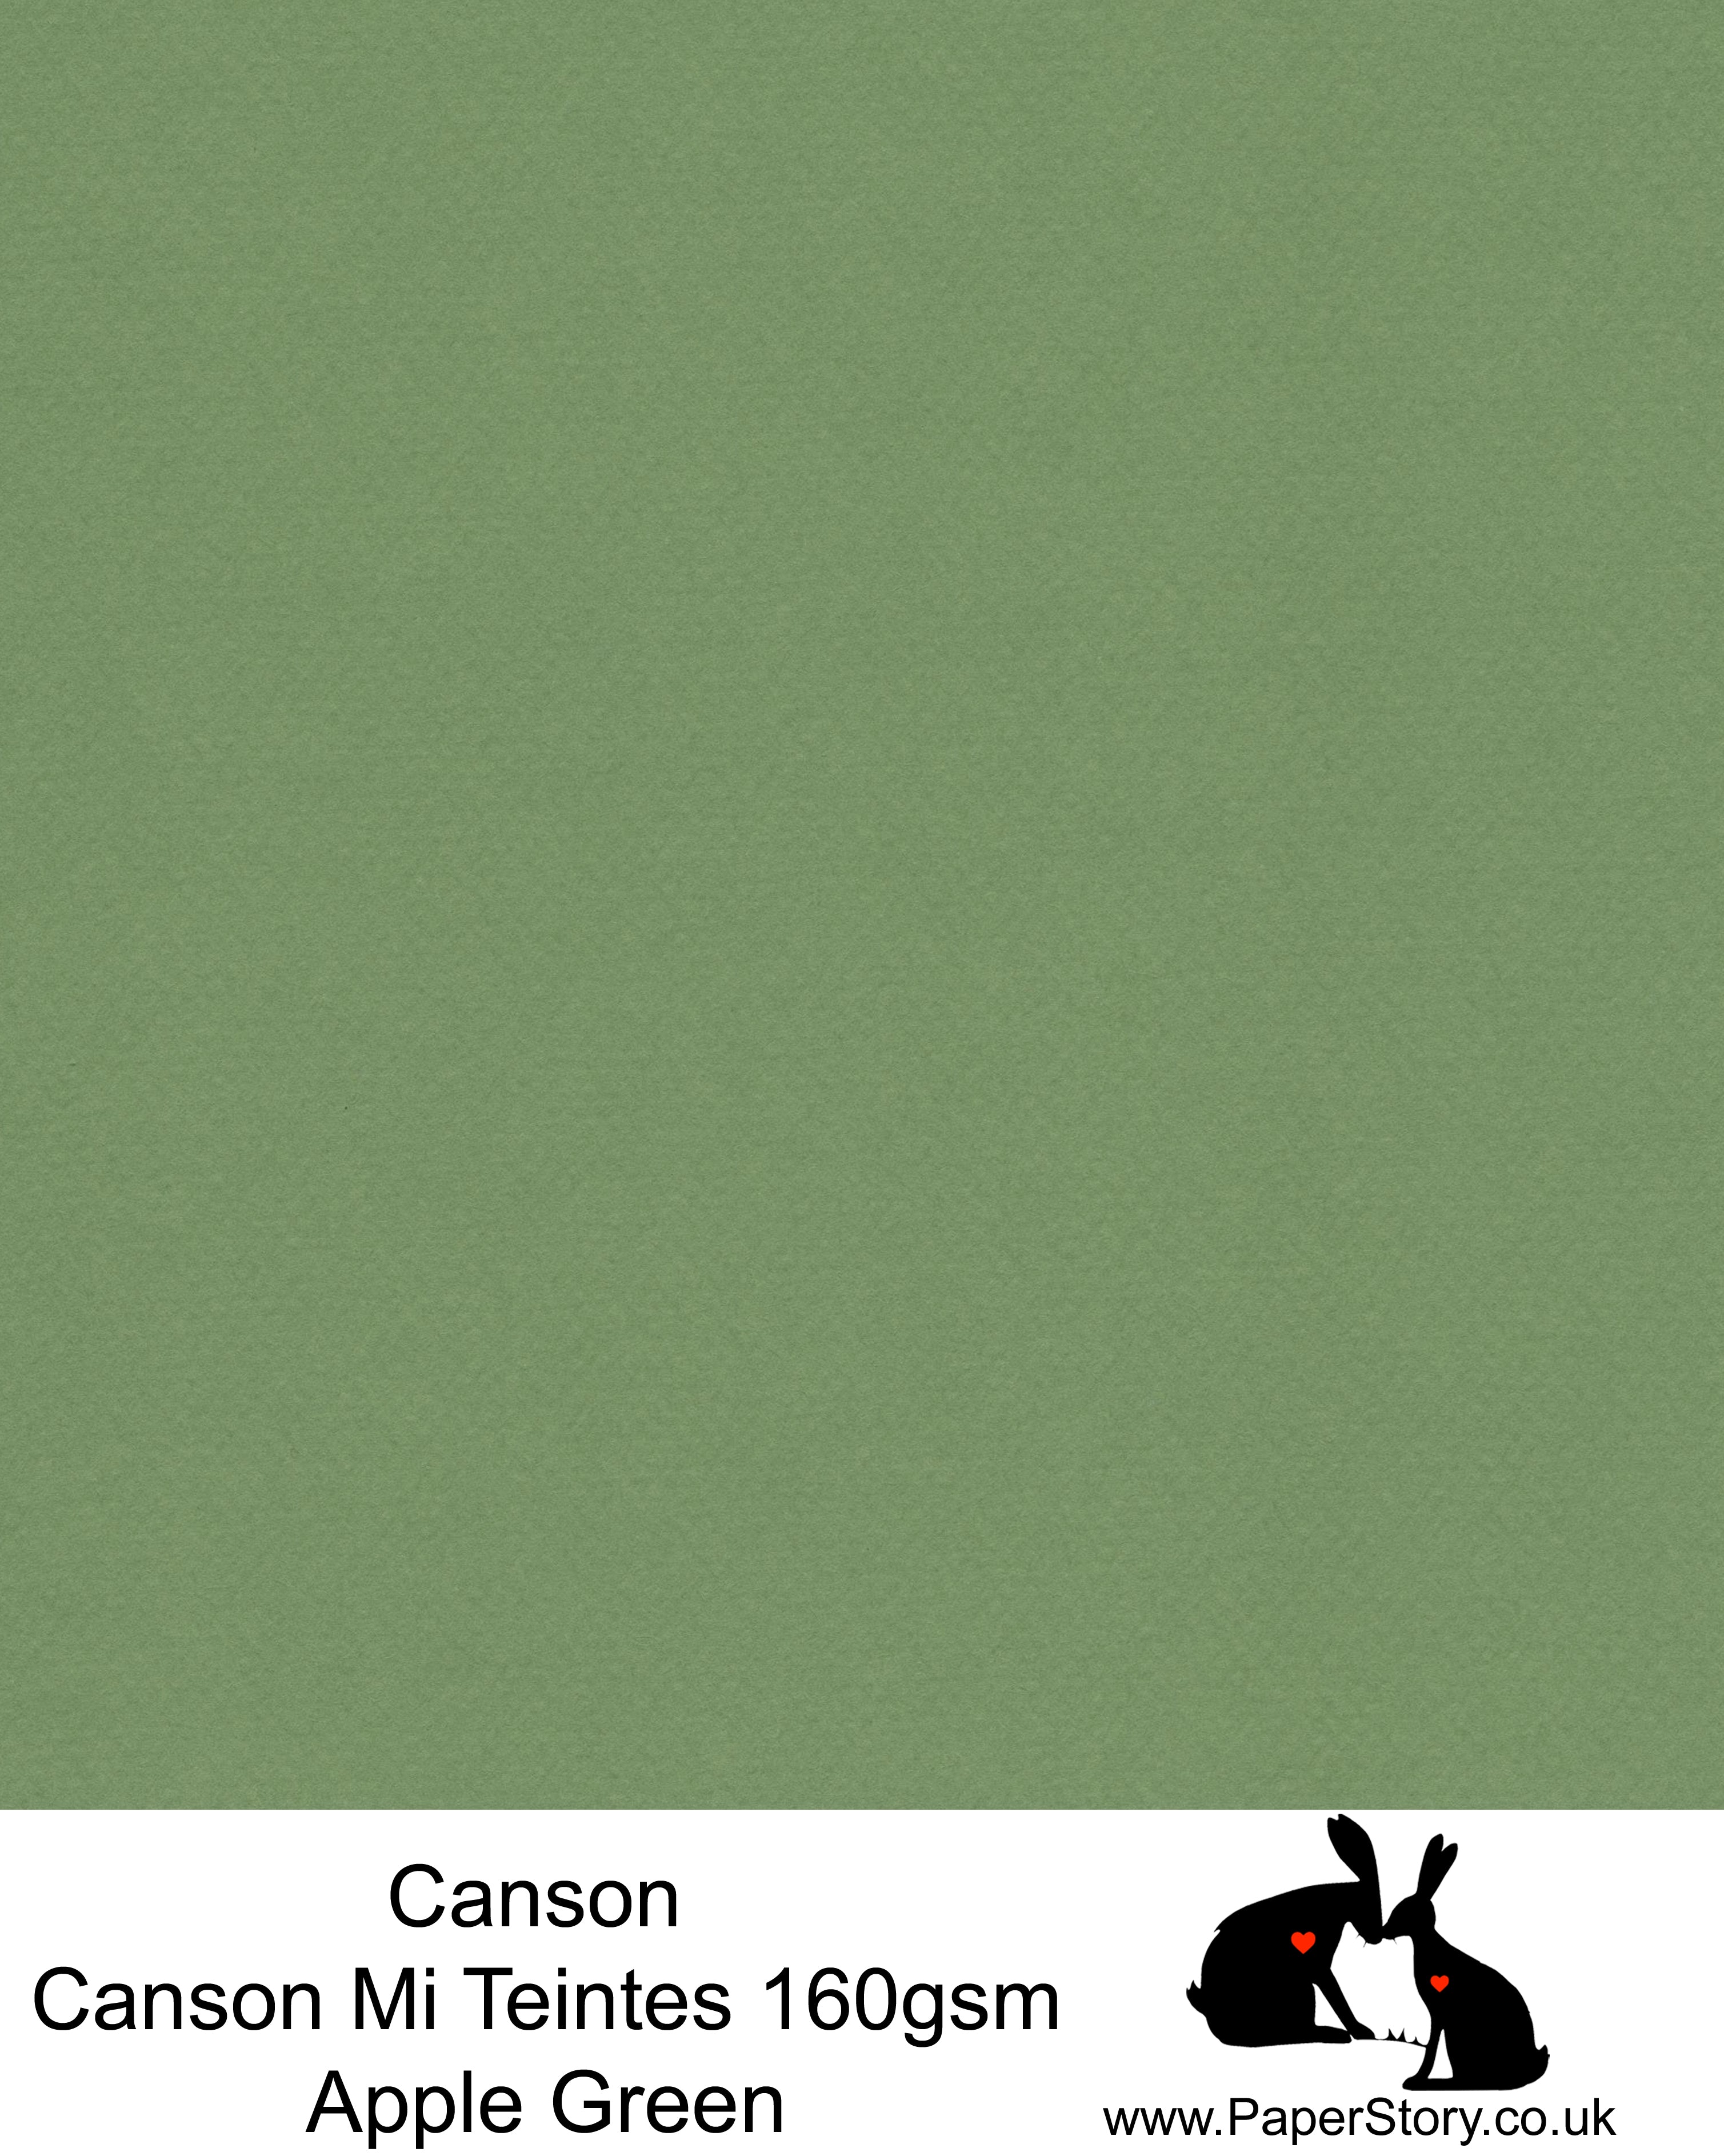 Canson Mi Teintes acid free, Champagne, fresh apple green hammered texture honeycomb surface paper 160 gsm. This is a popular and classic paper for all artists especially well respected for Pastel  and Papercutting made famous by Paper Panda. This paper has a honeycombed finish one side and fine grain the other. An authentic art paper, acid free with a  very high 50% cotton content. Canson Mi-Teintes complies with the ISO 9706 standard on permanence, a guarantee of excellent conservation 